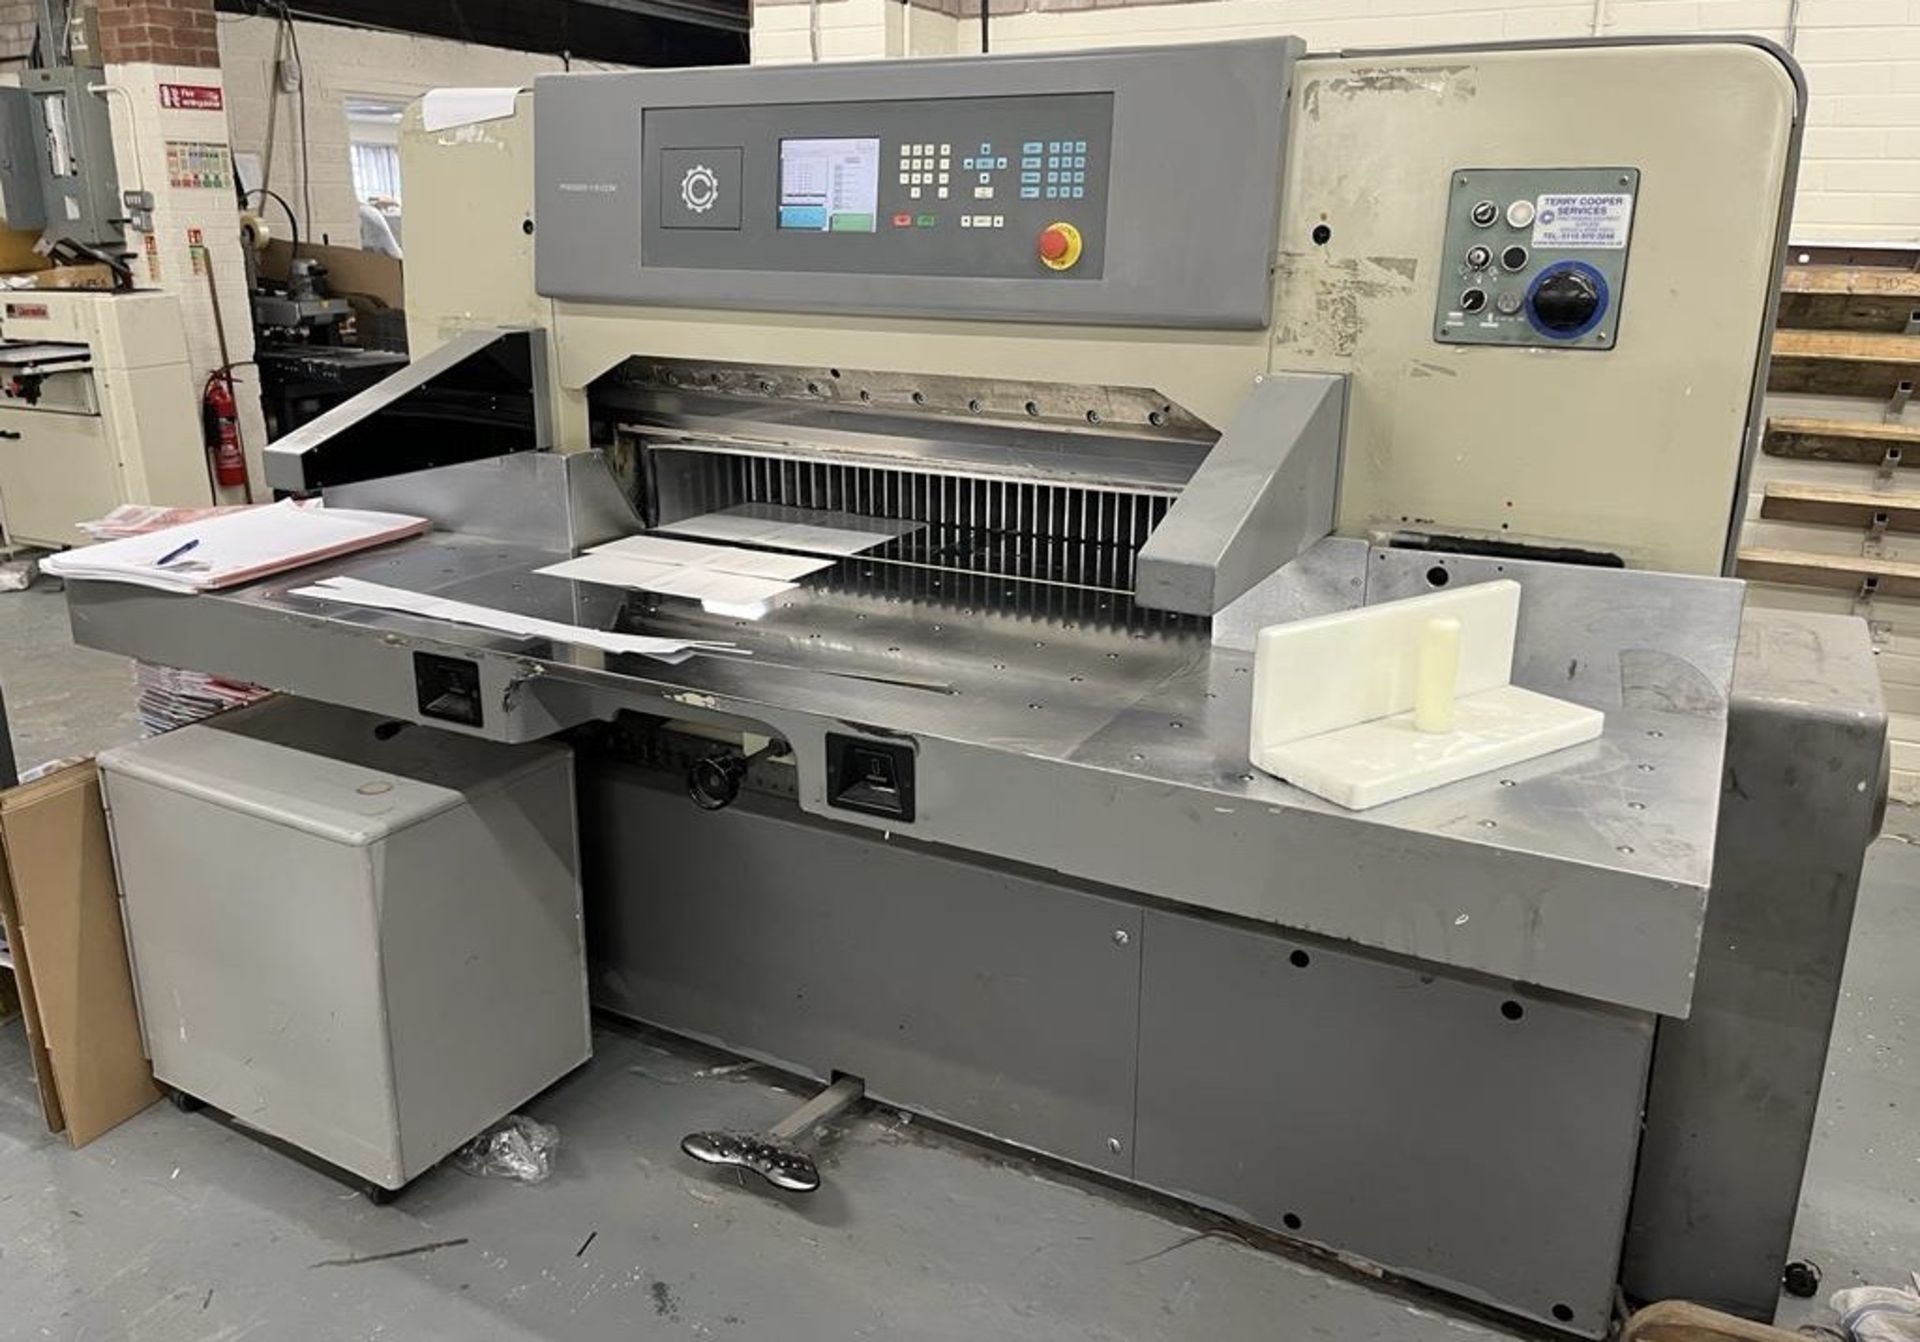 Terry Cooper Premier 115 CCM Programmable Guillotine, 1150mm, year 2006, serial number 06110 ( - Image 3 of 6